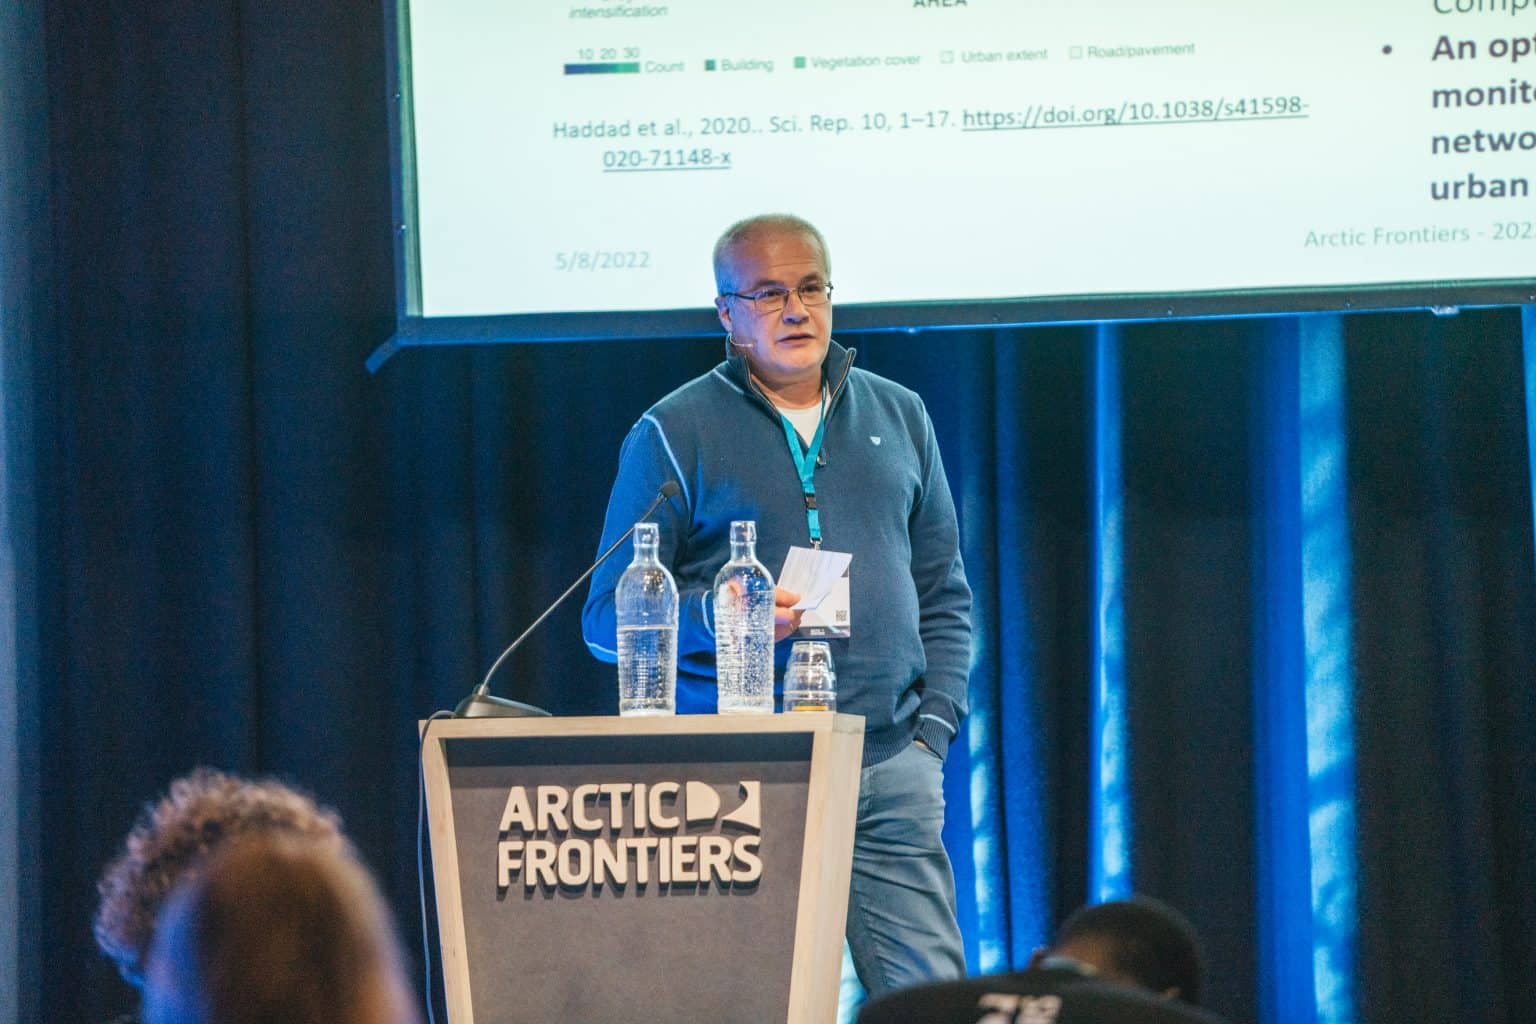 A male scientist stands on stage behind a podium with the Arctic Frontiers logo. He is presenting his work to the audience.